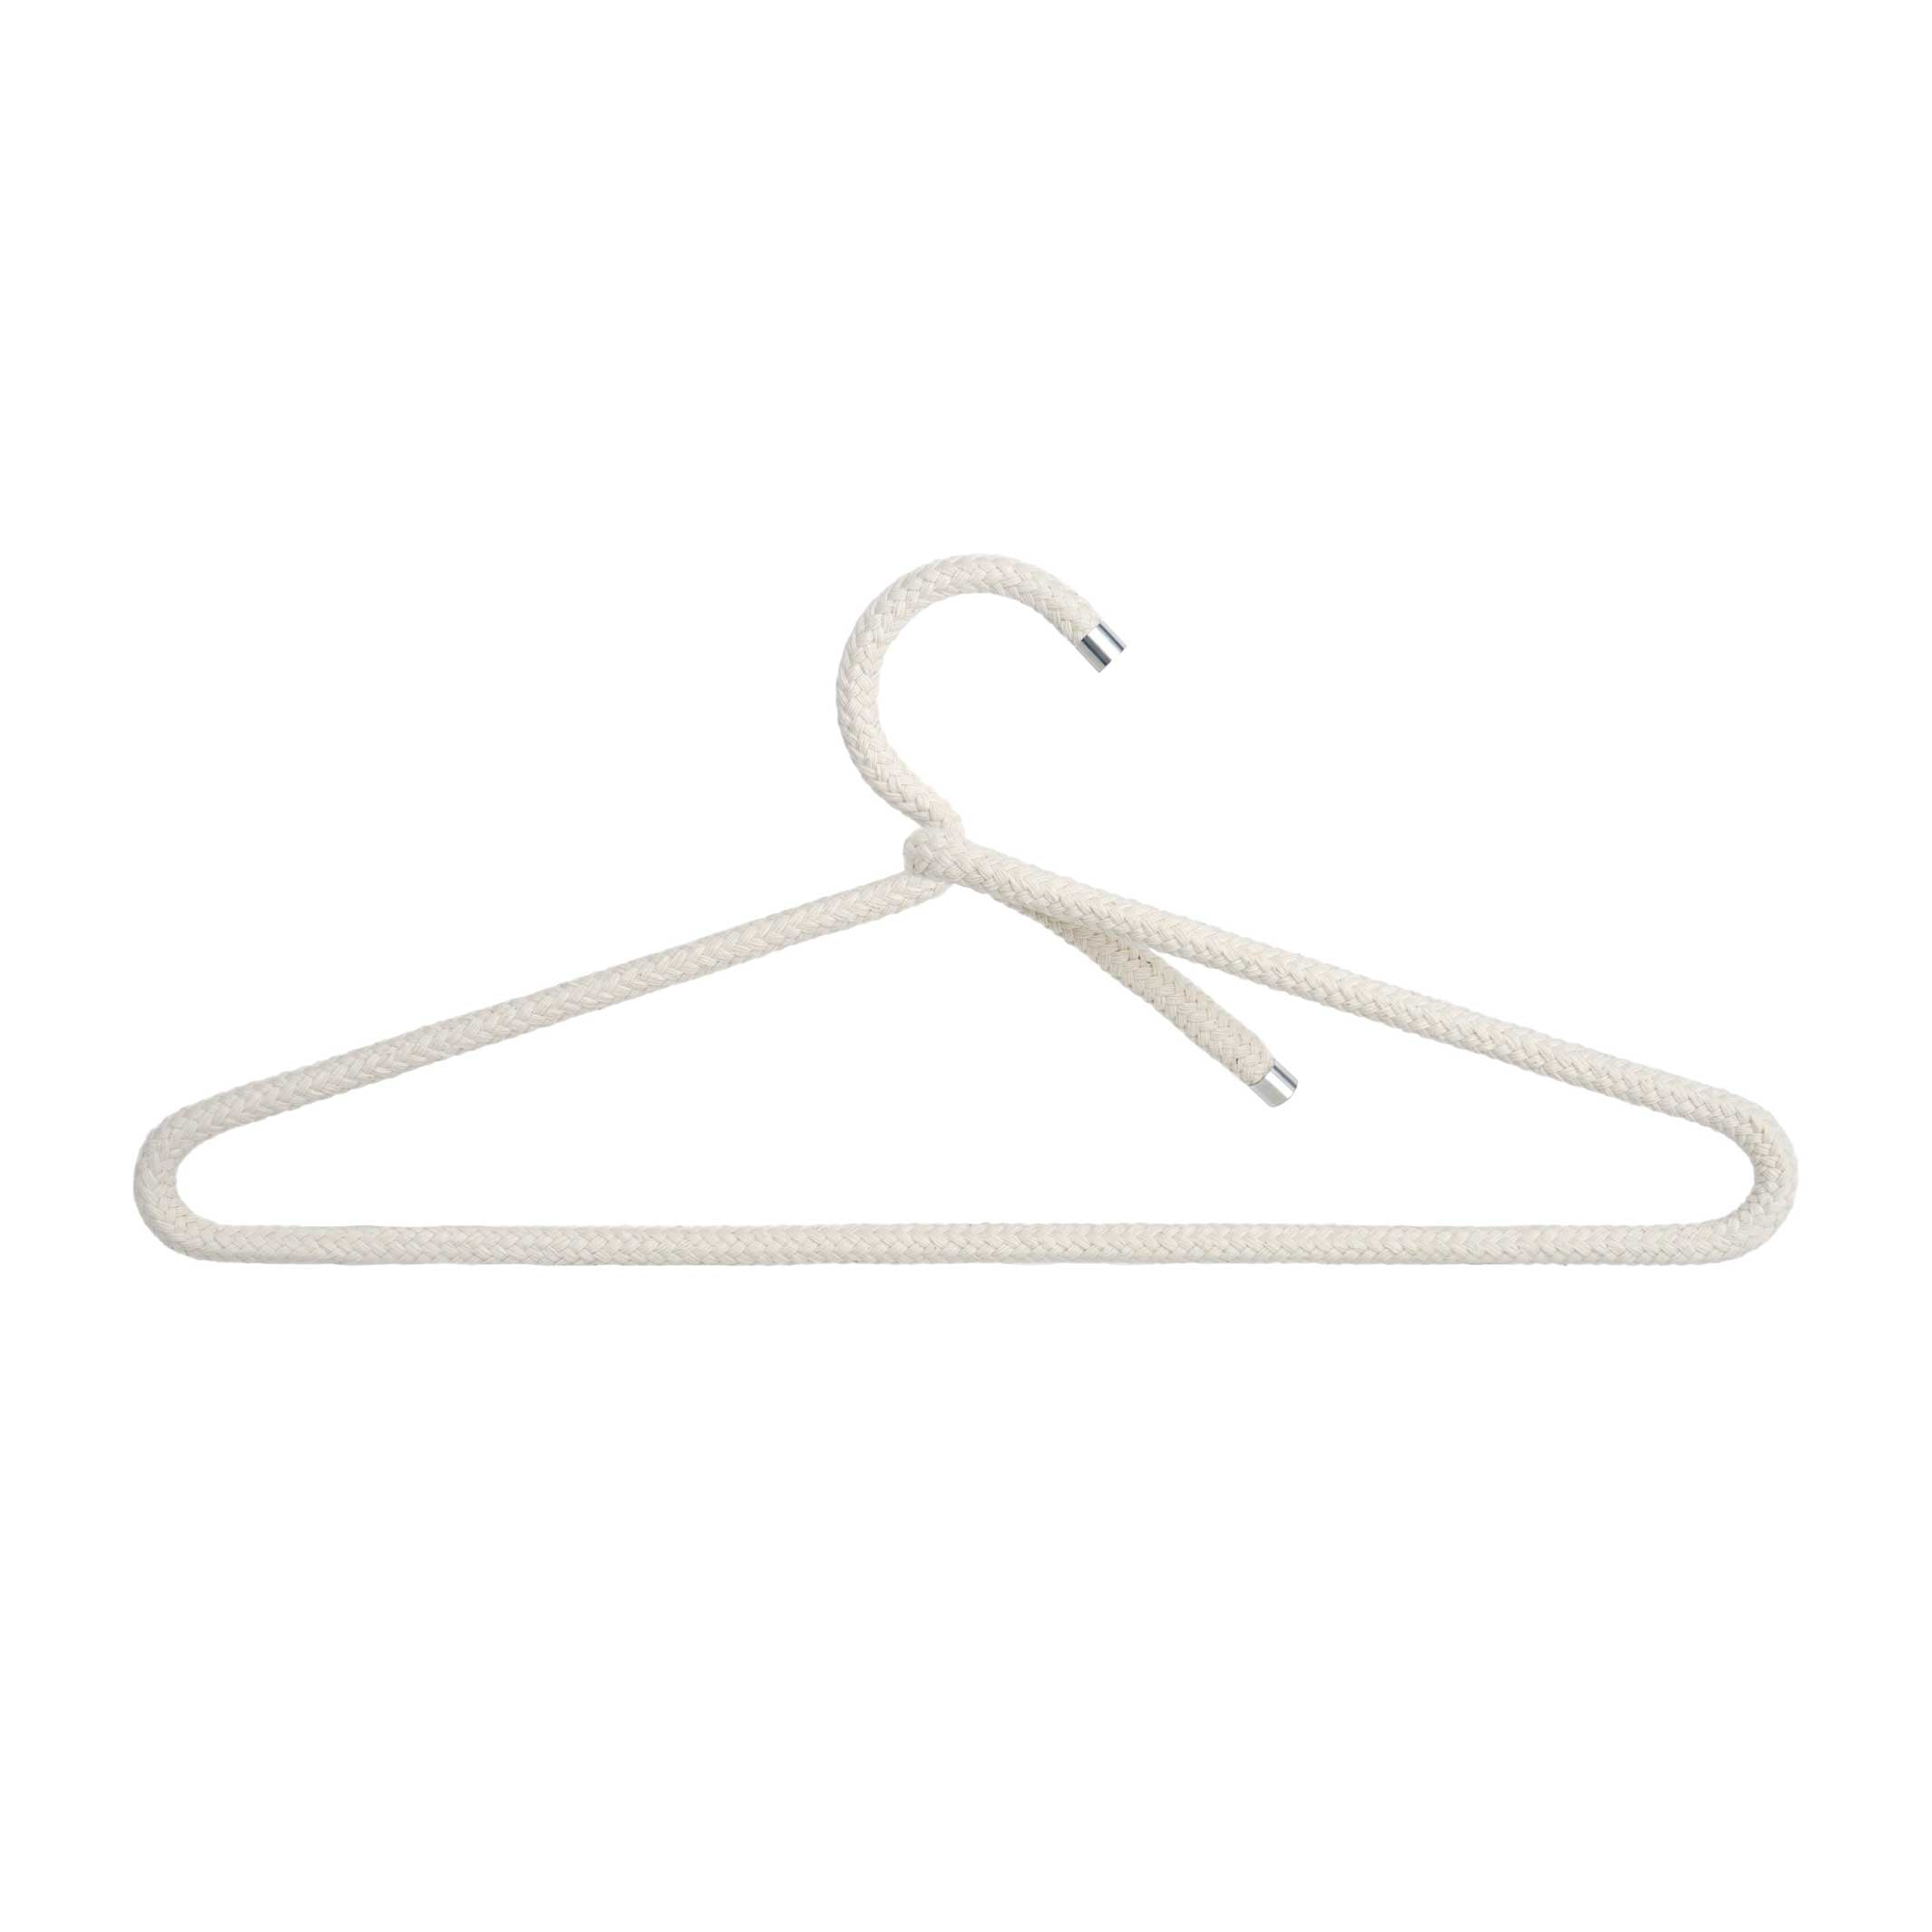 ROPE HANGER Cotton | Natural Cotton HANGERS | Set of 3 | Peppermint Products